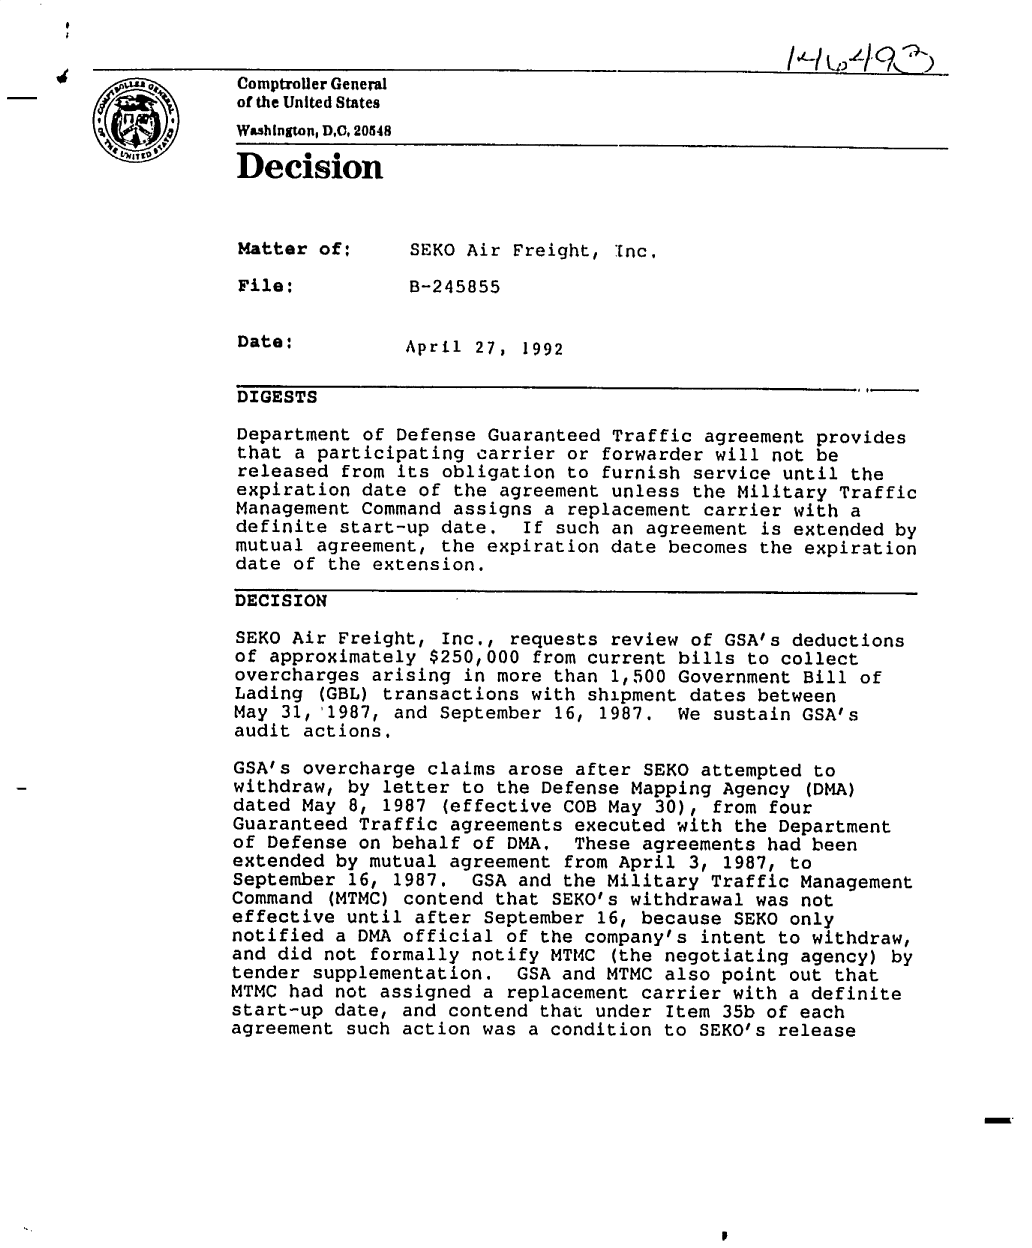 handle is hein.gao/gaobadoaz0001 and id is 1 raw text is: 


Comptroller General
of the United States
WashIngton, DC, 20548

Decision



Matter of:      SEKO Air Freight, Inc.

File:           B-245855


Date:           April 27, 1992

DIGESTS
Department of Defense Guaranteed Traffic agreement provides
that a participating carrier or forwarder will not be
released from its obligation to furnish service until the
expiration date of the agreement unless the Military Traffic
Management Command assigns a replacement carrier with a
definite start-up date,    If such an agreement is extended by
mutual agreement, the expiration date becomes the expiration
date of the extension.

DECISION

SEKO Air Freight, Inc., requests review of GSA's deductions
of approximately $250,000 from current bills to collect
overcharges arising in more than 1,500 Government Bill of
Lading (GBL) transactions with shipment dates between
May 31, '1987, and September 16, 1987. We sustain GSA's
audit actions.
GSA's overcharge claims arose after SEKO attempted to
withdraw, by letter to the Defense Mapping Agency (DMA)
dated May 8, 1987 (effective COB May 30), from four
Guaranteed Traffic agreements executed with the Department
of Defense on behalf of DMA. These agreements had been
extended by mutual agreement from April 3, 1987, to
September 16, 1987. GSA and the Military Traffic Management
Command (MTMC) contend that SEKO's withdrawal was not
effective until after September 16, because SEKO only
notified a DMA official of the company's intent to withdraw,
and did not formally notify MTMC (the negotiating agency) by
tender supplementation. GSA and MTMC also point out that
MTMC had not assigned a replacement carrier with a definite
start-up date, and contend that under Item 35b of each
agreement such action was a condition to SEKO's release


